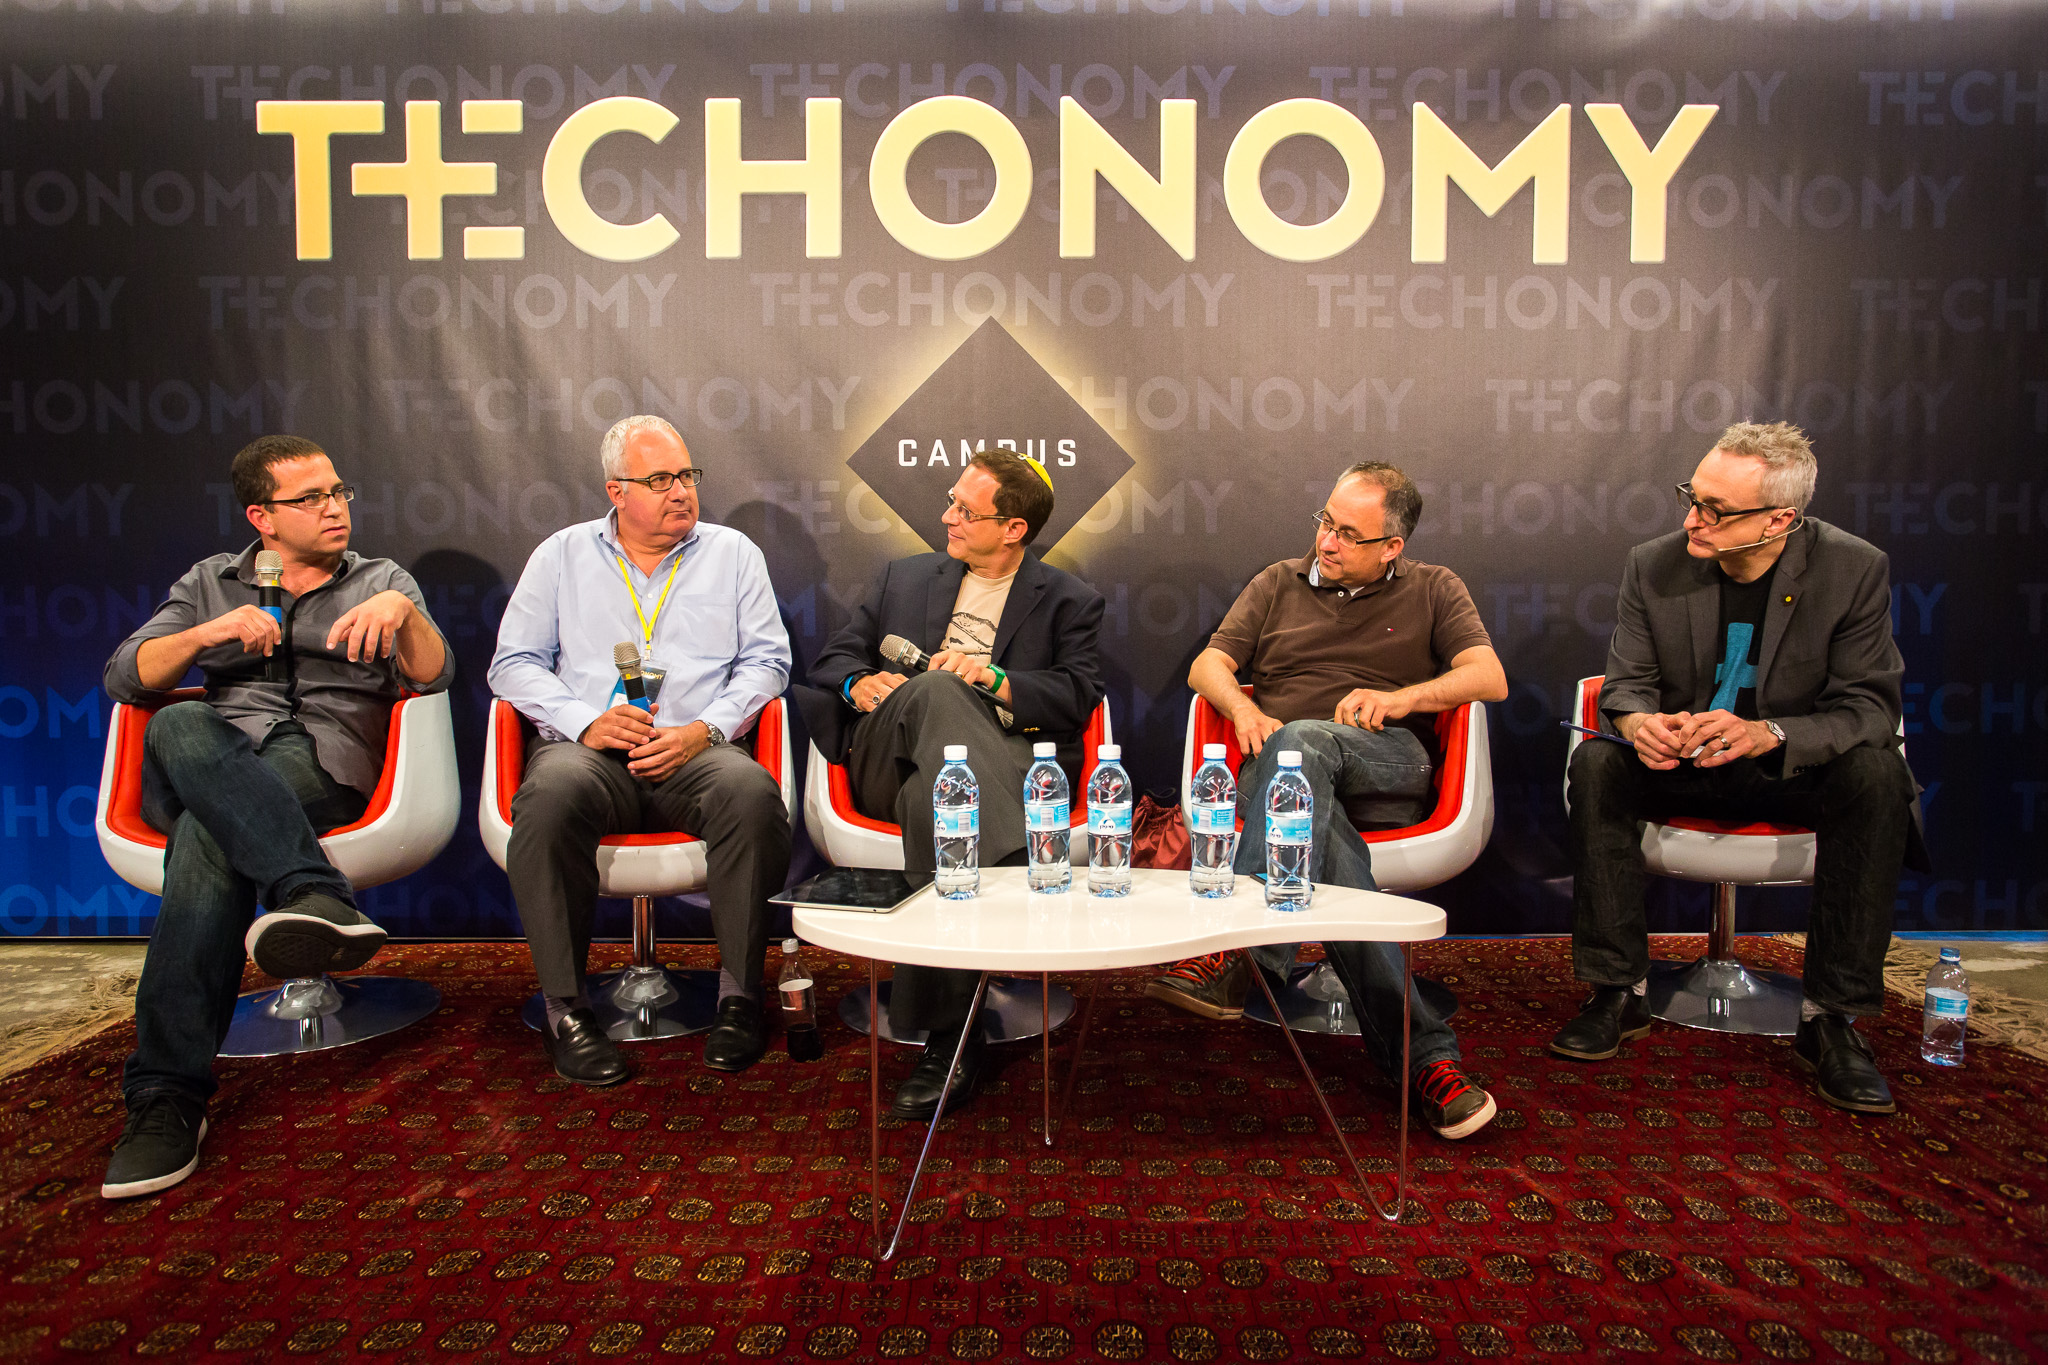 Techonomy – Technology and the Economy as the Next 5B join the Internet